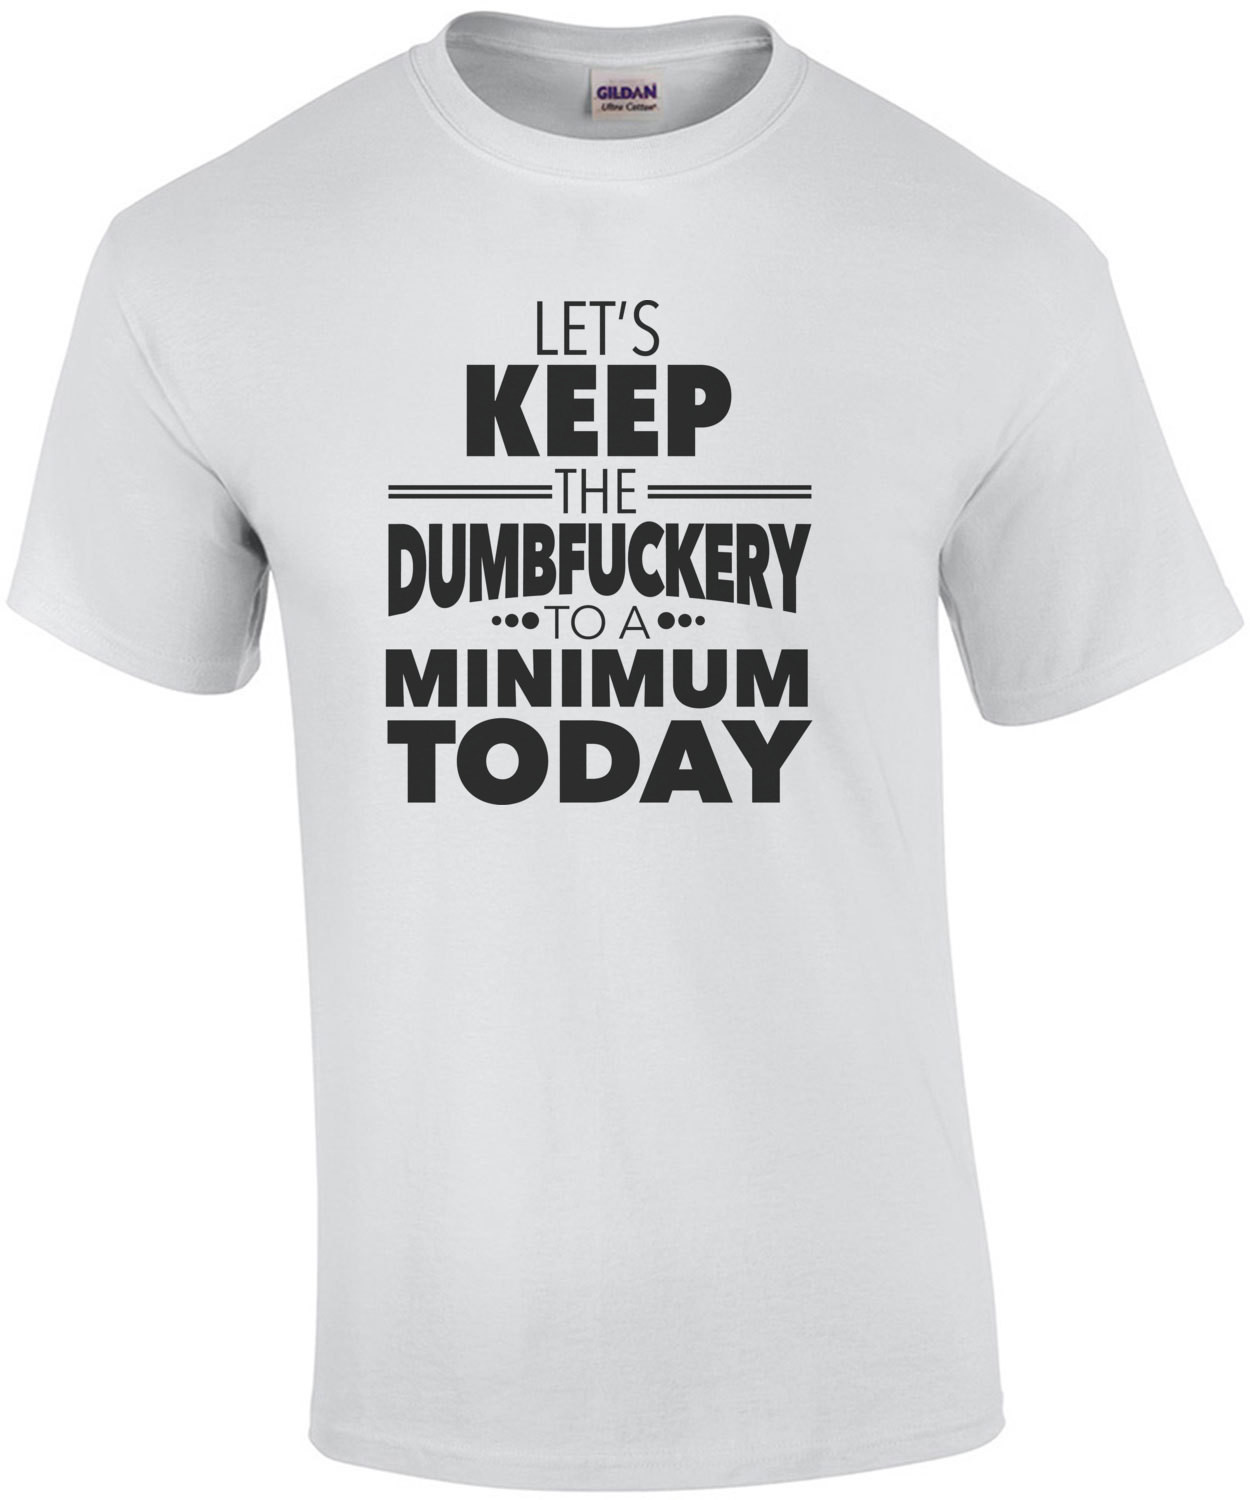 Let's keep the dumbfuckery to a minimum today - funny t-shirt